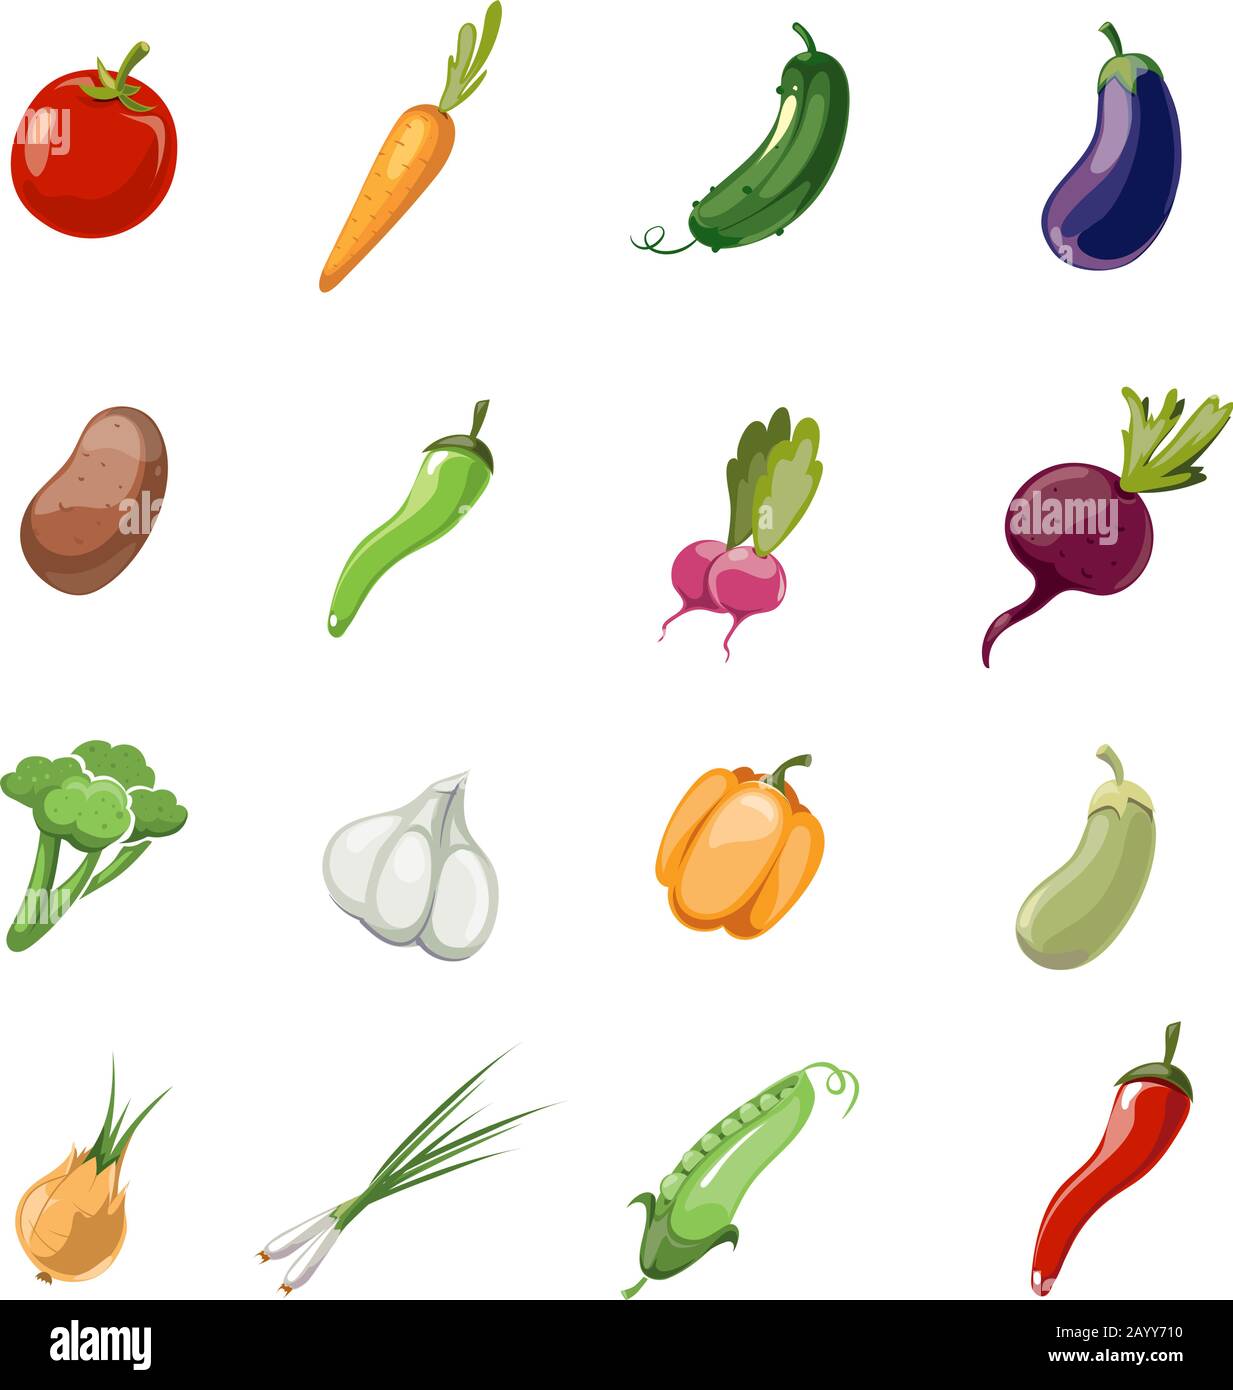 Cartoon vegetables vector. Set of icons vegetable in color style, illustration of vegetarian vegetables Stock Vector